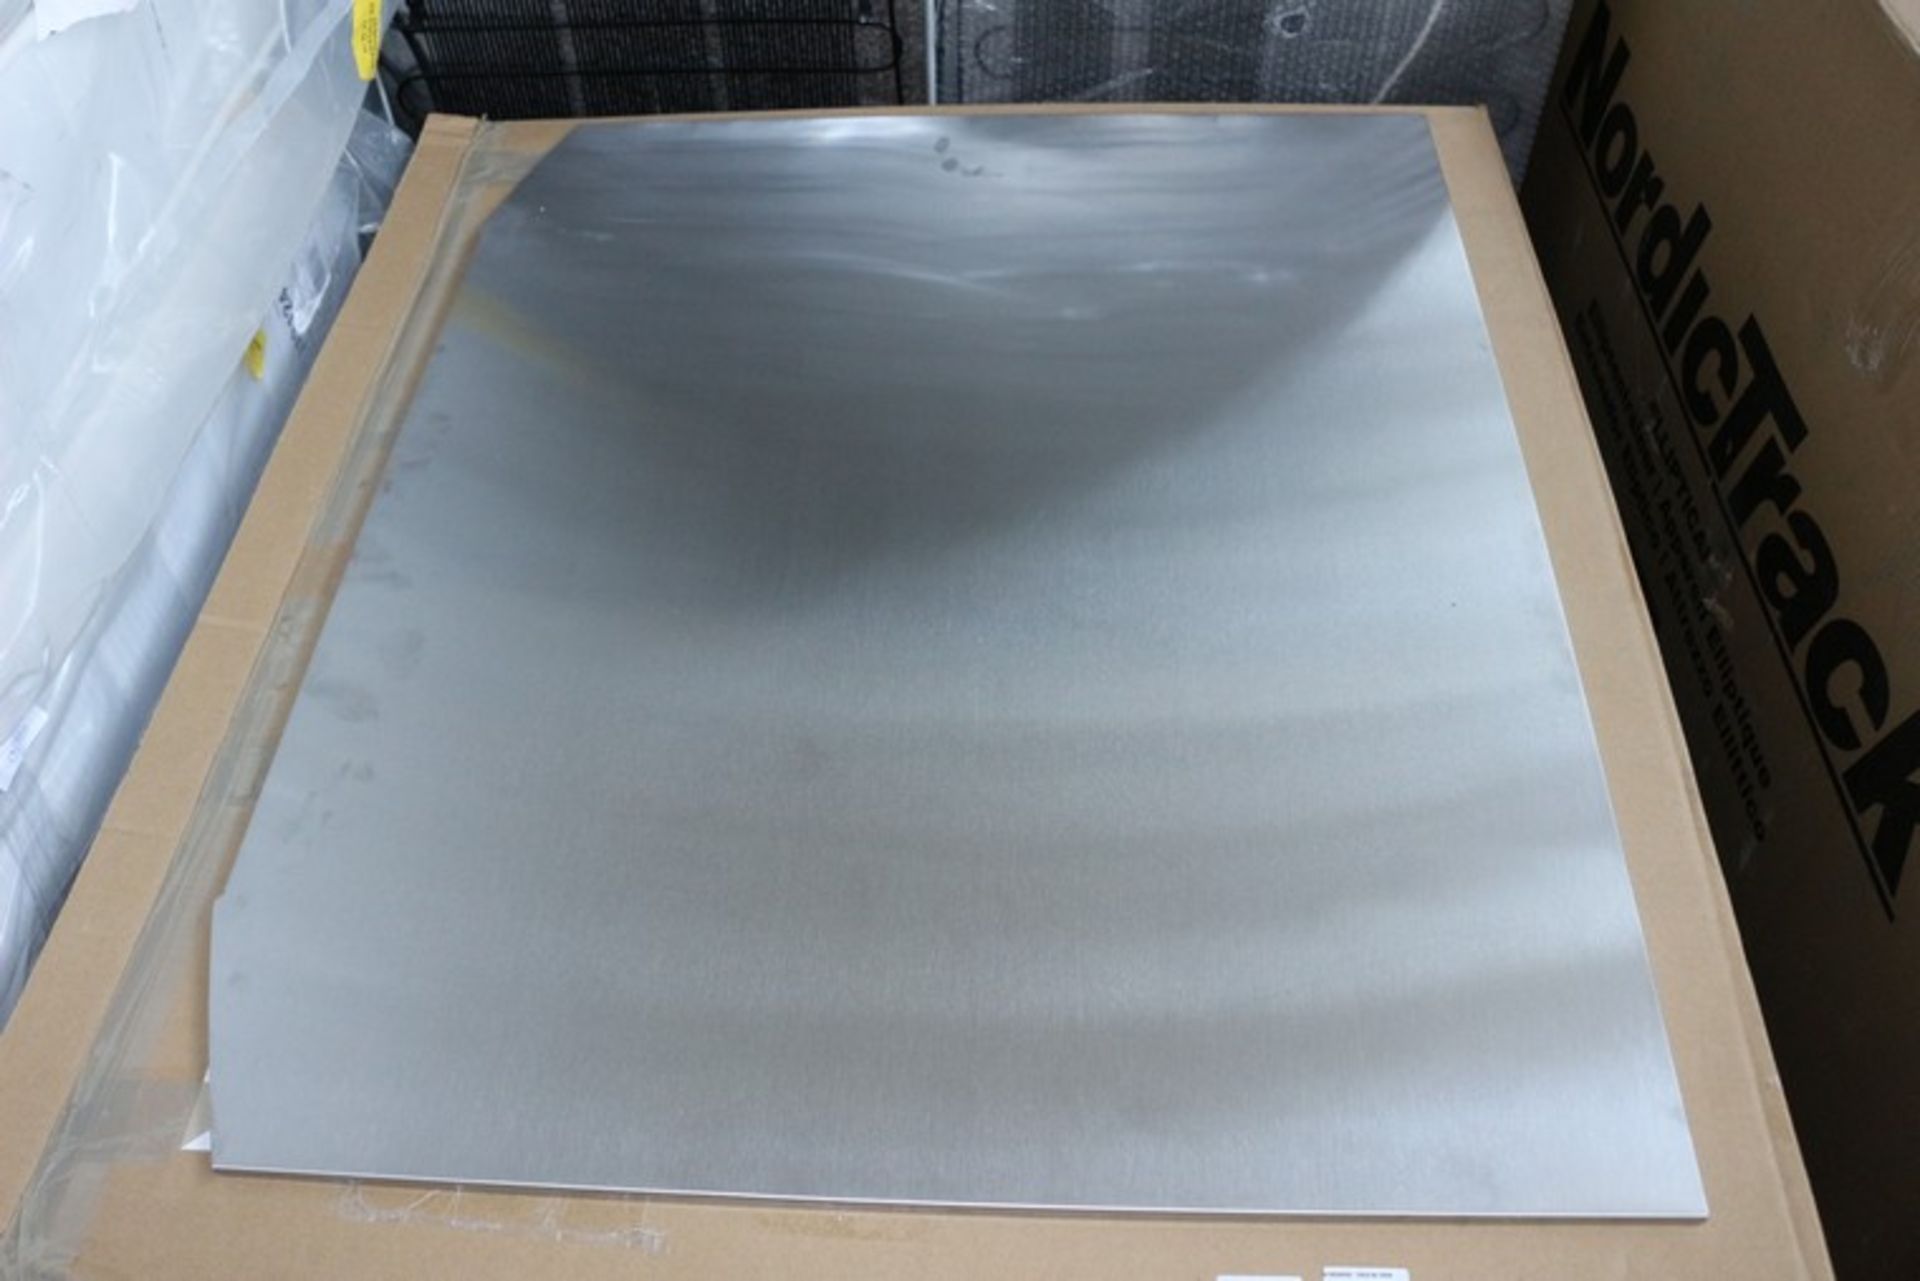 1 x BOXED STAINLESS STEEL 90CM CURVED DESIGNER SPLASH BACK *PLEASE NOTE THAT THE BID PRICE IS